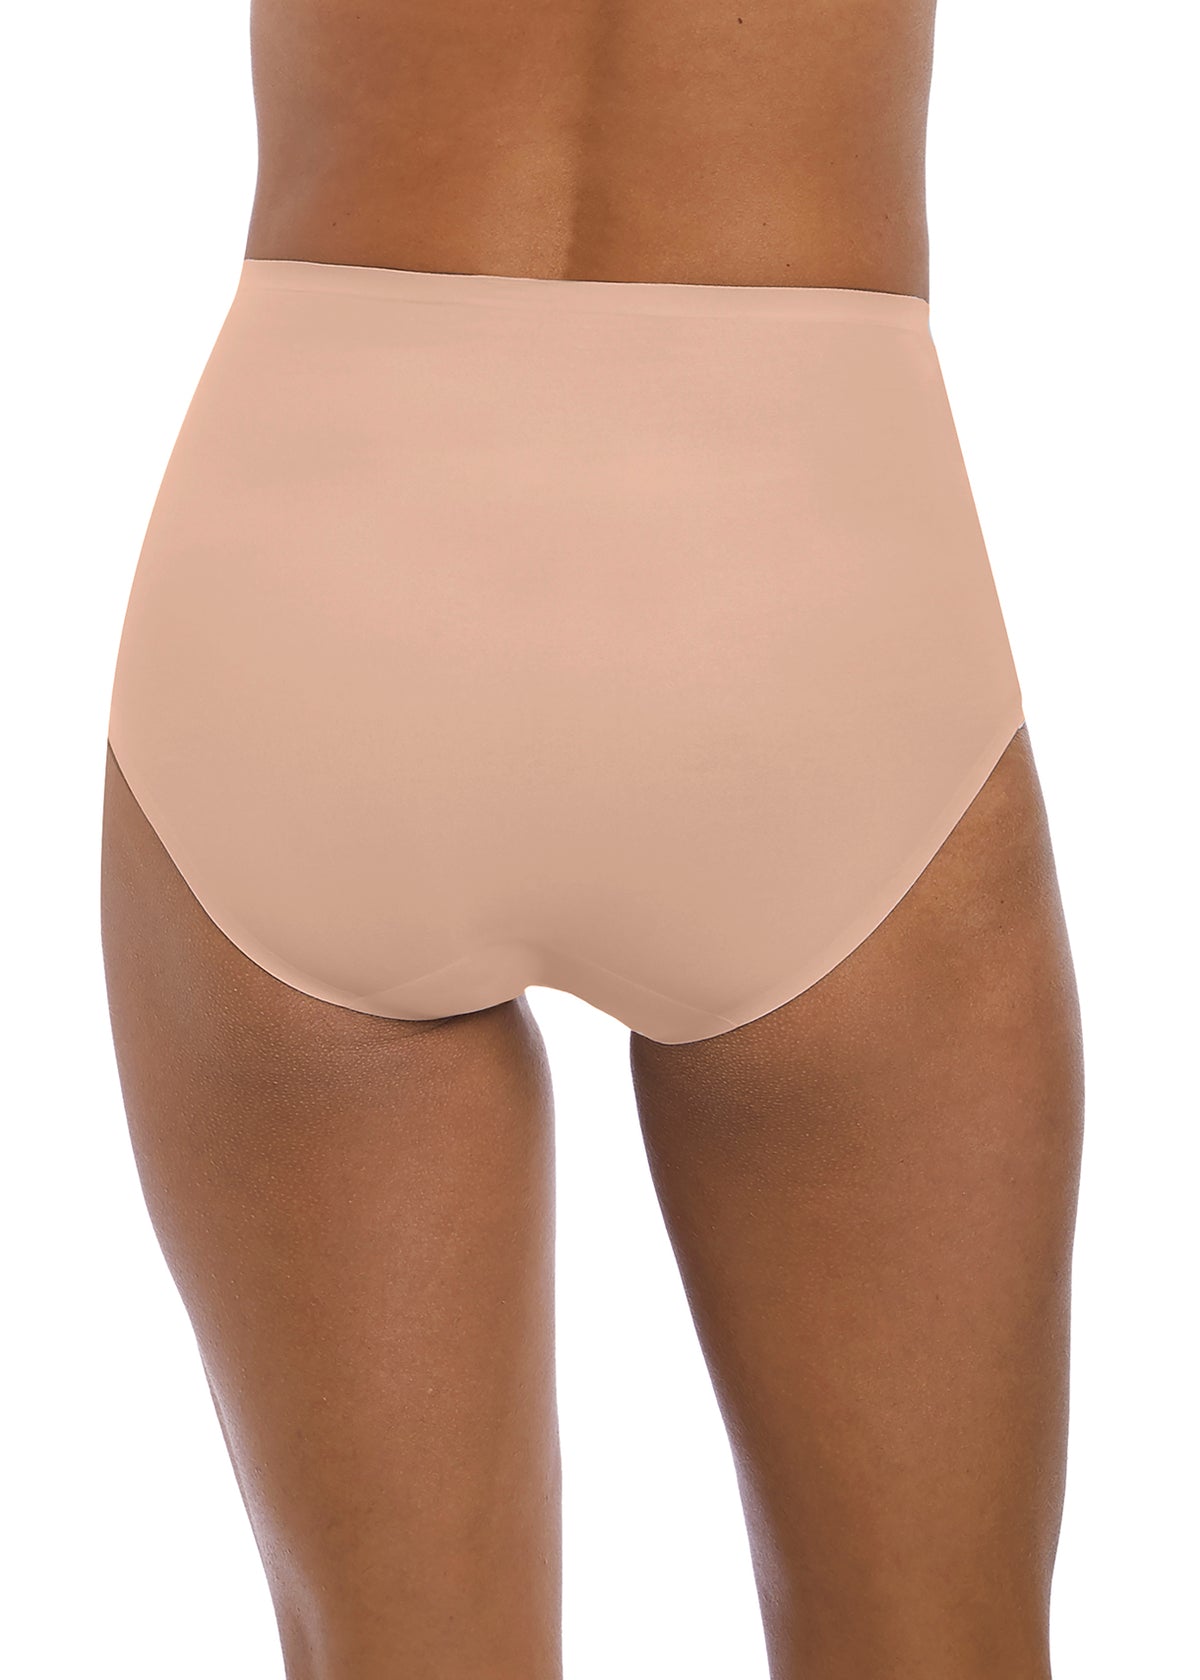 Fantasie Smoothease Invisible Stretch Full Brief - Beige 2 Shaws Department Stores